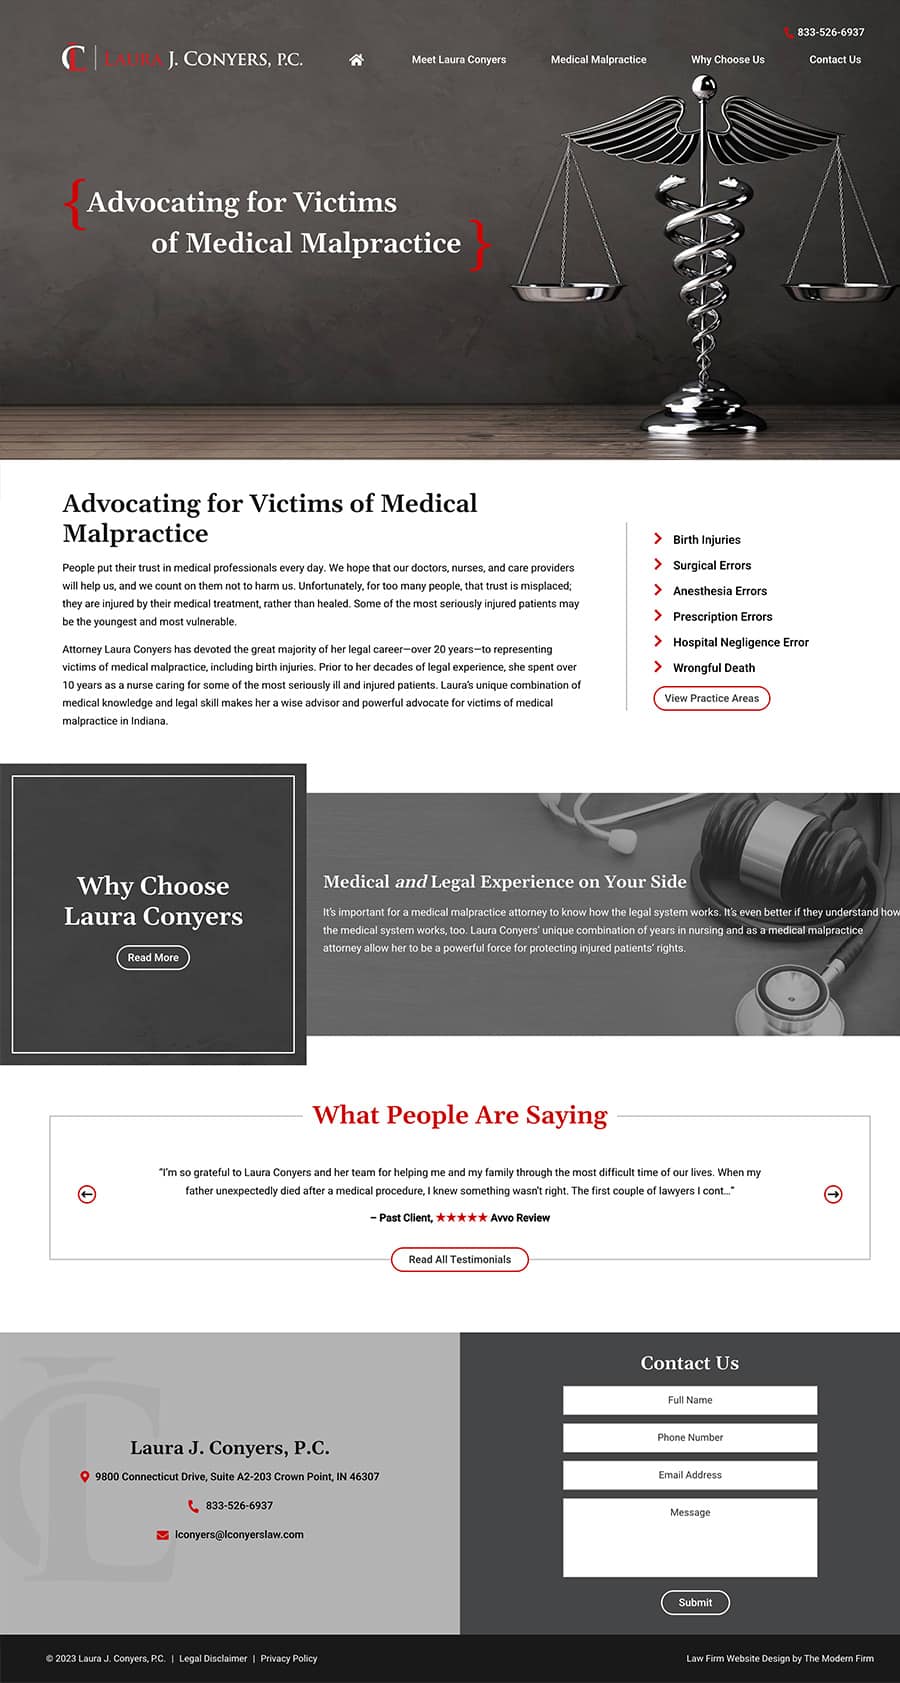 Law Firm Website Design for Laura J. Conyers, P.C.